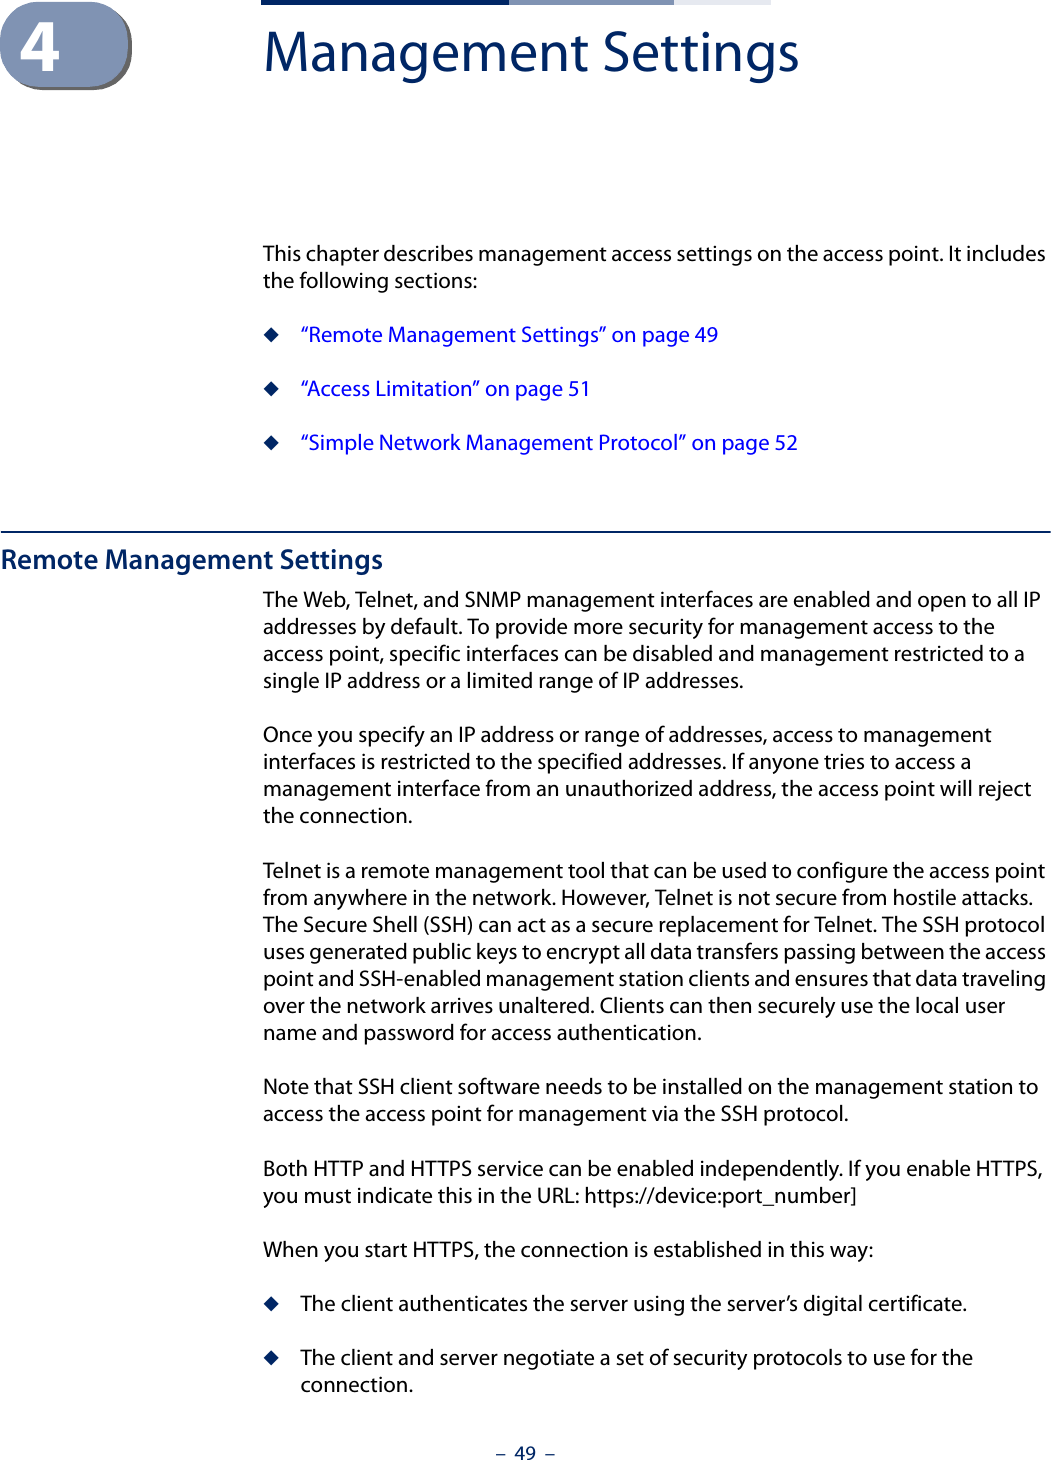 –  49  –4Management SettingsThis chapter describes management access settings on the access point. It includes the following sections:◆“Remote Management Settings” on page 49◆“Access Limitation” on page 51◆“Simple Network Management Protocol” on page 52Remote Management SettingsThe Web, Telnet, and SNMP management interfaces are enabled and open to all IP addresses by default. To provide more security for management access to the access point, specific interfaces can be disabled and management restricted to a single IP address or a limited range of IP addresses.Once you specify an IP address or range of addresses, access to management interfaces is restricted to the specified addresses. If anyone tries to access a management interface from an unauthorized address, the access point will reject the connection.Telnet is a remote management tool that can be used to configure the access point from anywhere in the network. However, Telnet is not secure from hostile attacks. The Secure Shell (SSH) can act as a secure replacement for Telnet. The SSH protocol uses generated public keys to encrypt all data transfers passing between the access point and SSH-enabled management station clients and ensures that data traveling over the network arrives unaltered. Clients can then securely use the local user name and password for access authentication.Note that SSH client software needs to be installed on the management station to access the access point for management via the SSH protocol.Both HTTP and HTTPS service can be enabled independently. If you enable HTTPS, you must indicate this in the URL: https://device:port_number]When you start HTTPS, the connection is established in this way:◆The client authenticates the server using the server’s digital certificate.◆The client and server negotiate a set of security protocols to use for the connection.